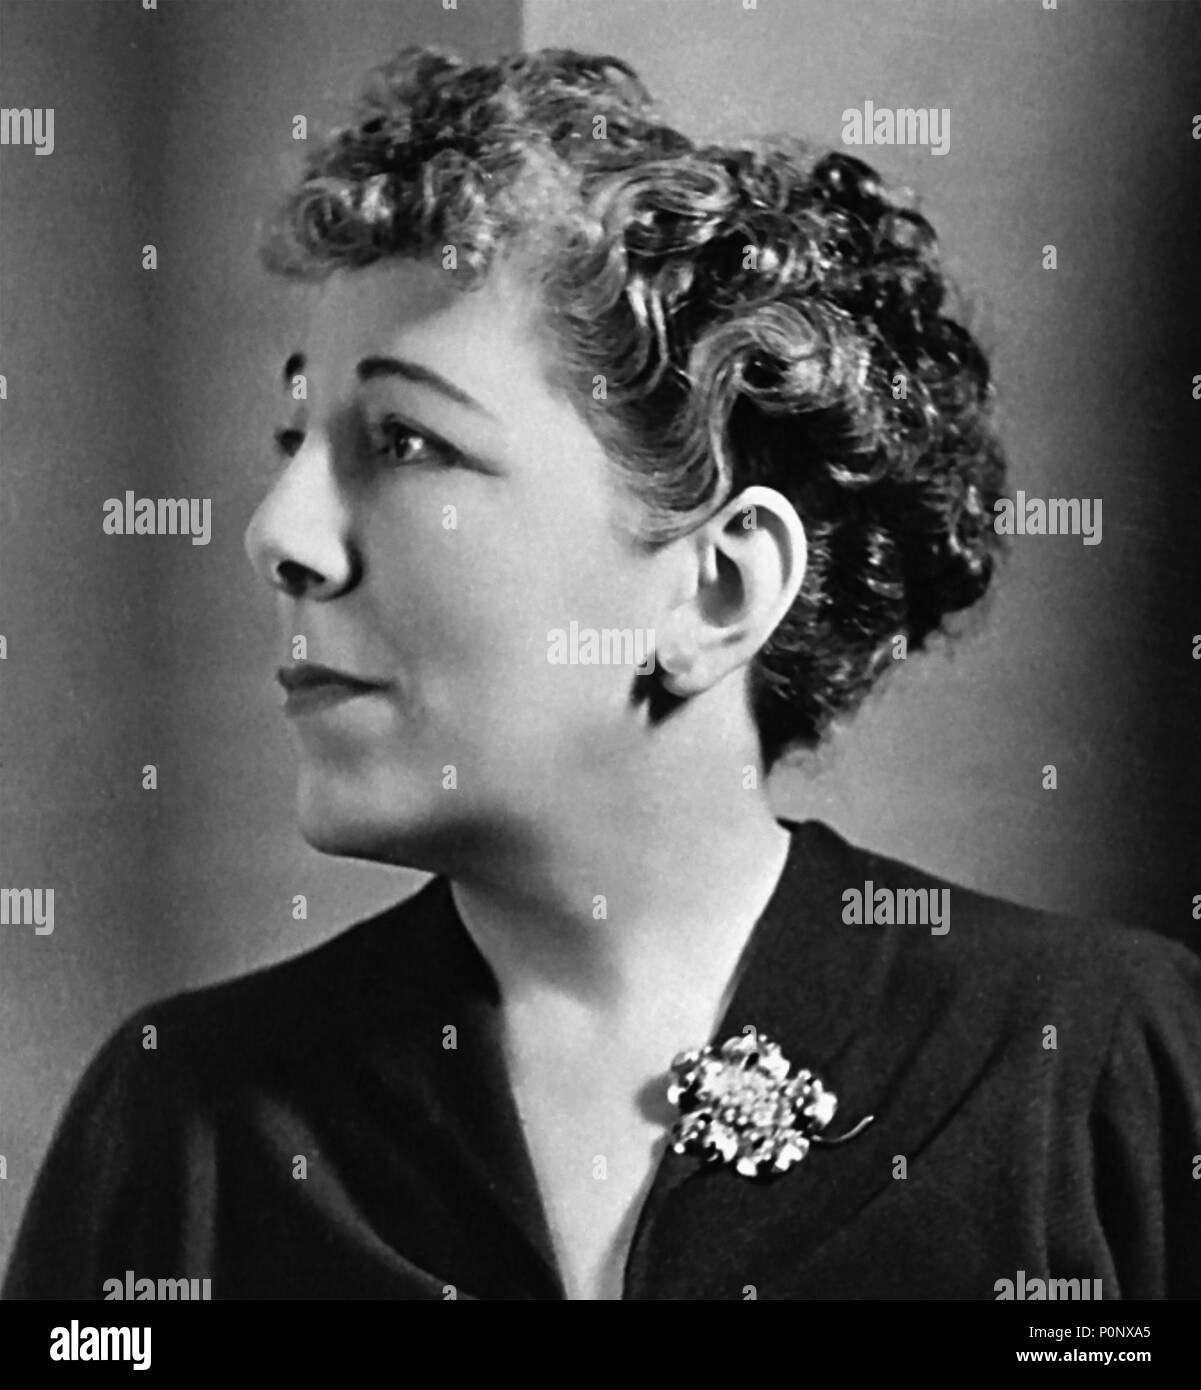 EDNA FERBER (1885-1968) American novelist and playwright. Stock Photo